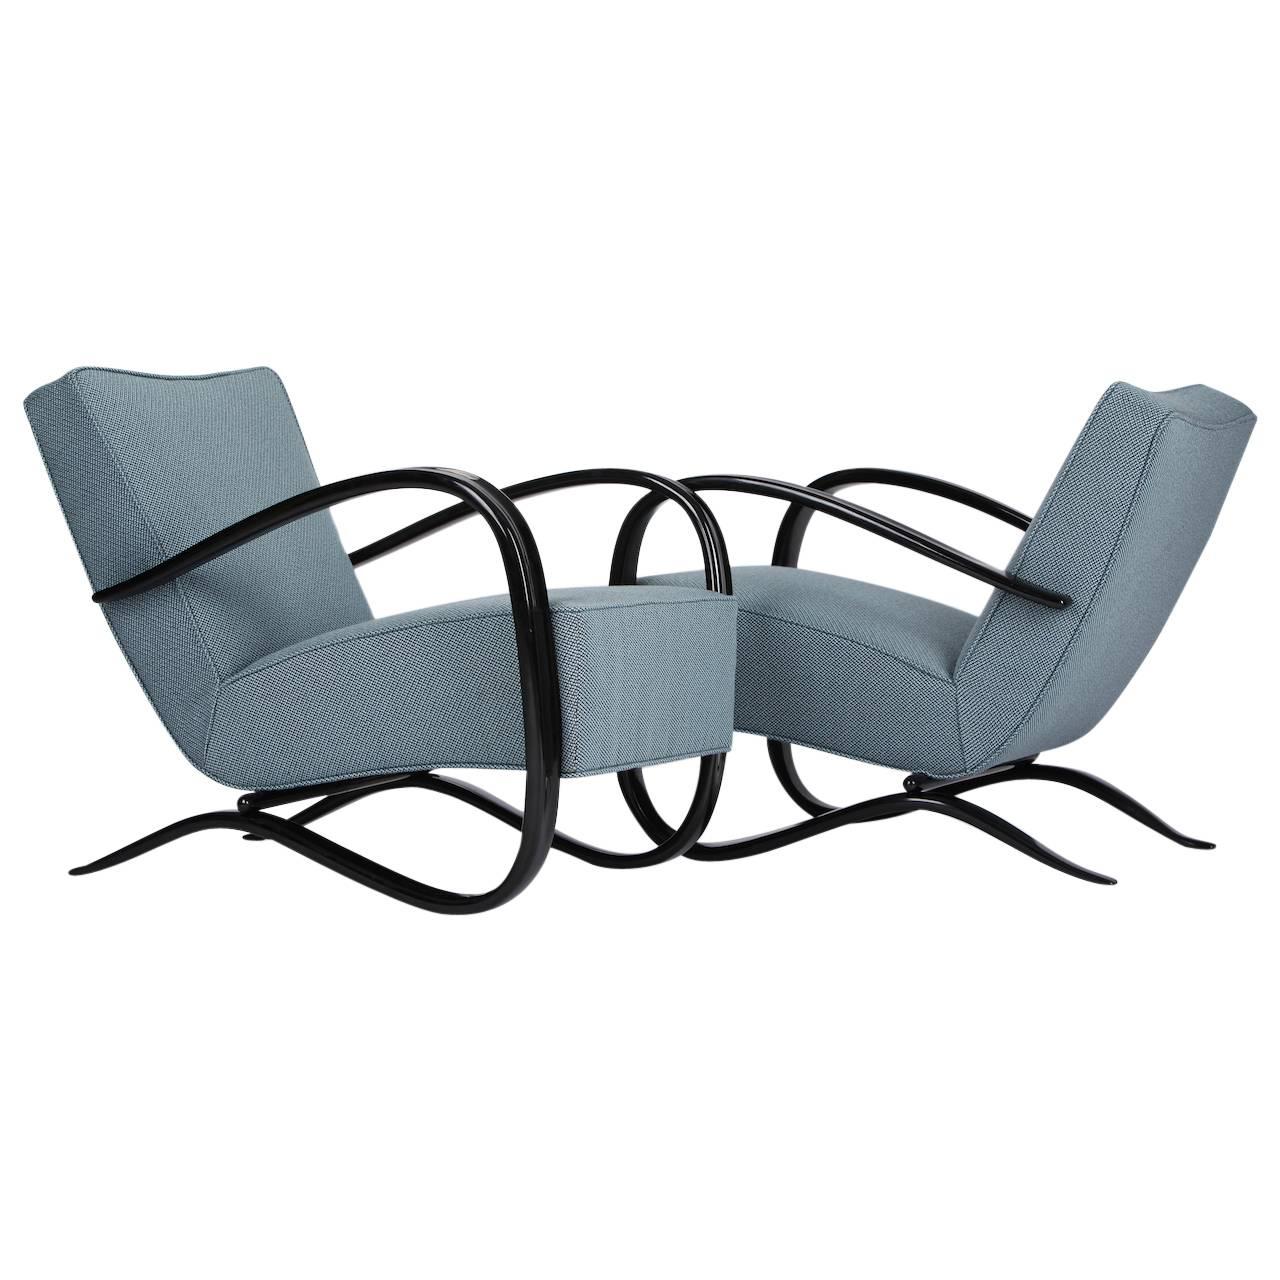 Two Streamline Lounge Chairs by Jindrich Halabala for UP Zavody in the 1930s